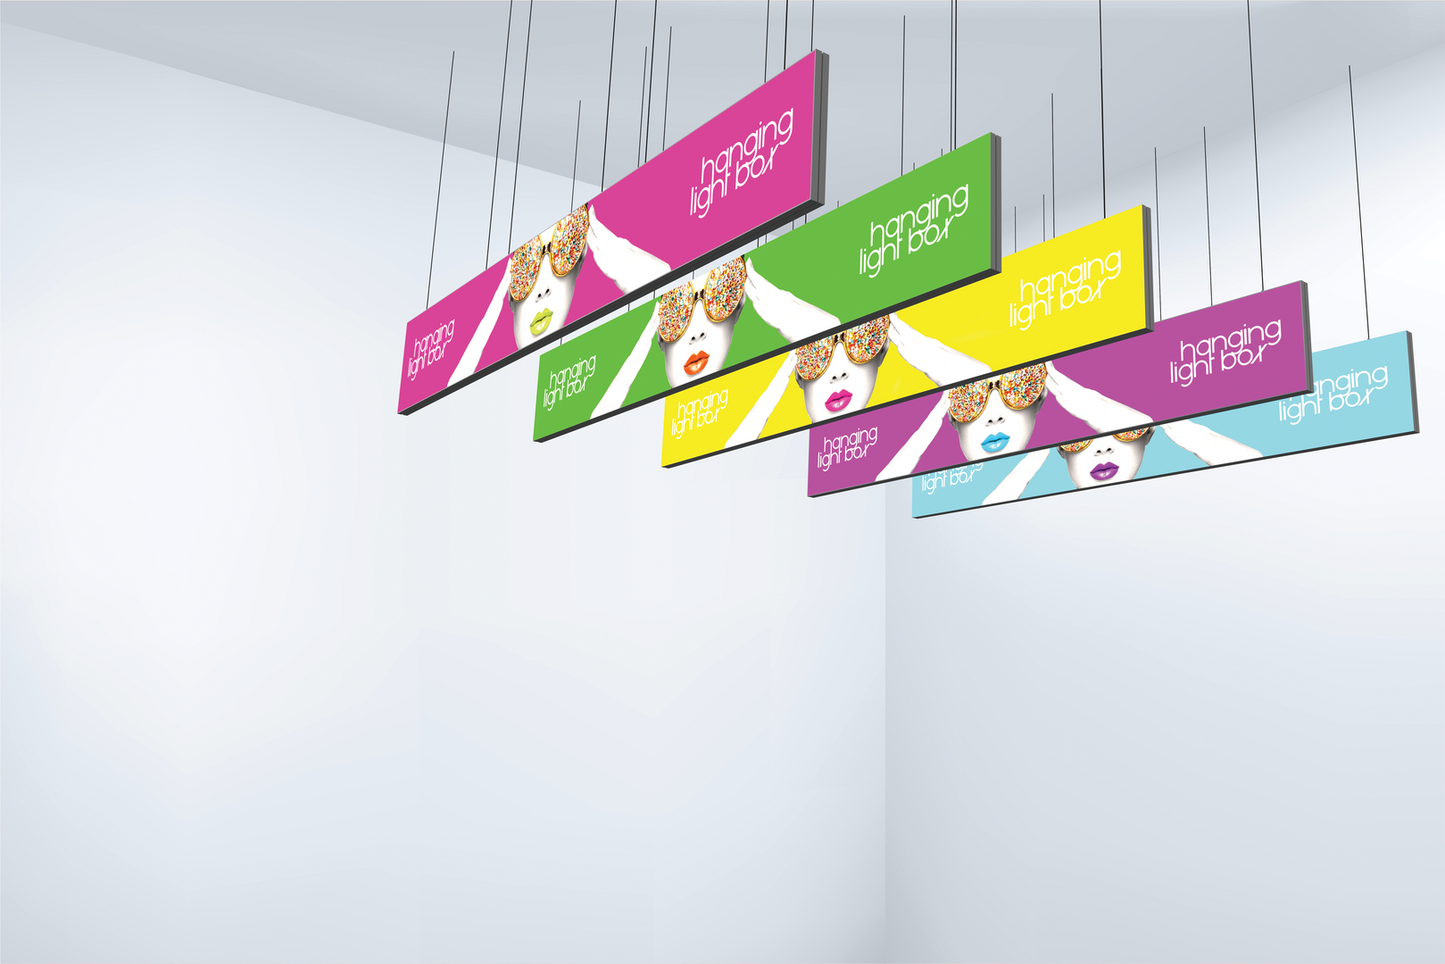 20ft x 3ft Vector Frame Hanging Light Box Double-Sided (Graphic Package)